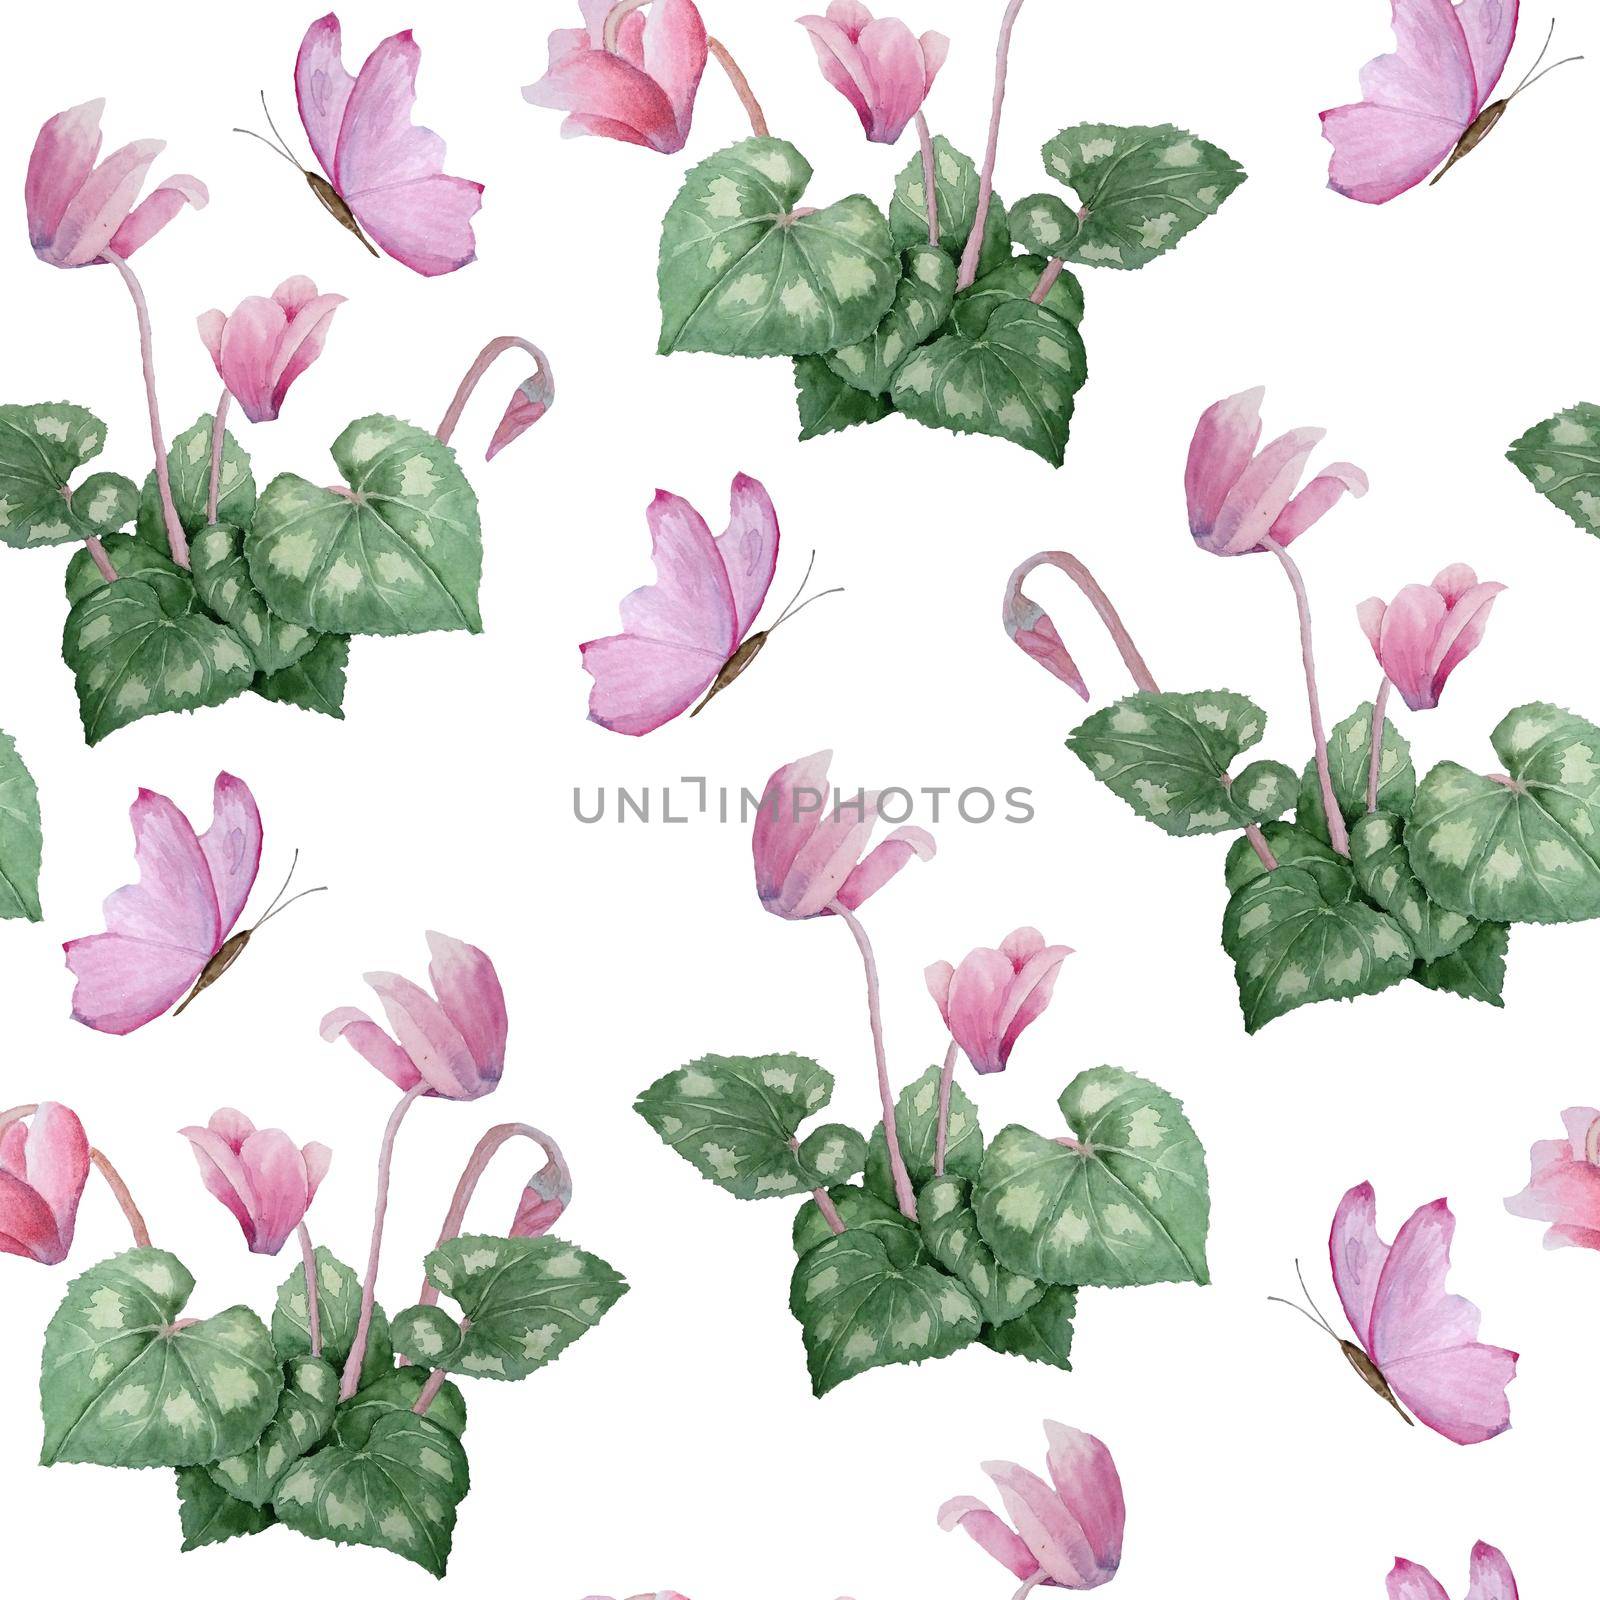 Watercolor hand drawn seamless pattern illustration of pink violet purple cyclamen wild flowers butterflies. Forest wood woodland nature plant, realistic design leaves petals. For wedding cards, invitation. by Lagmar